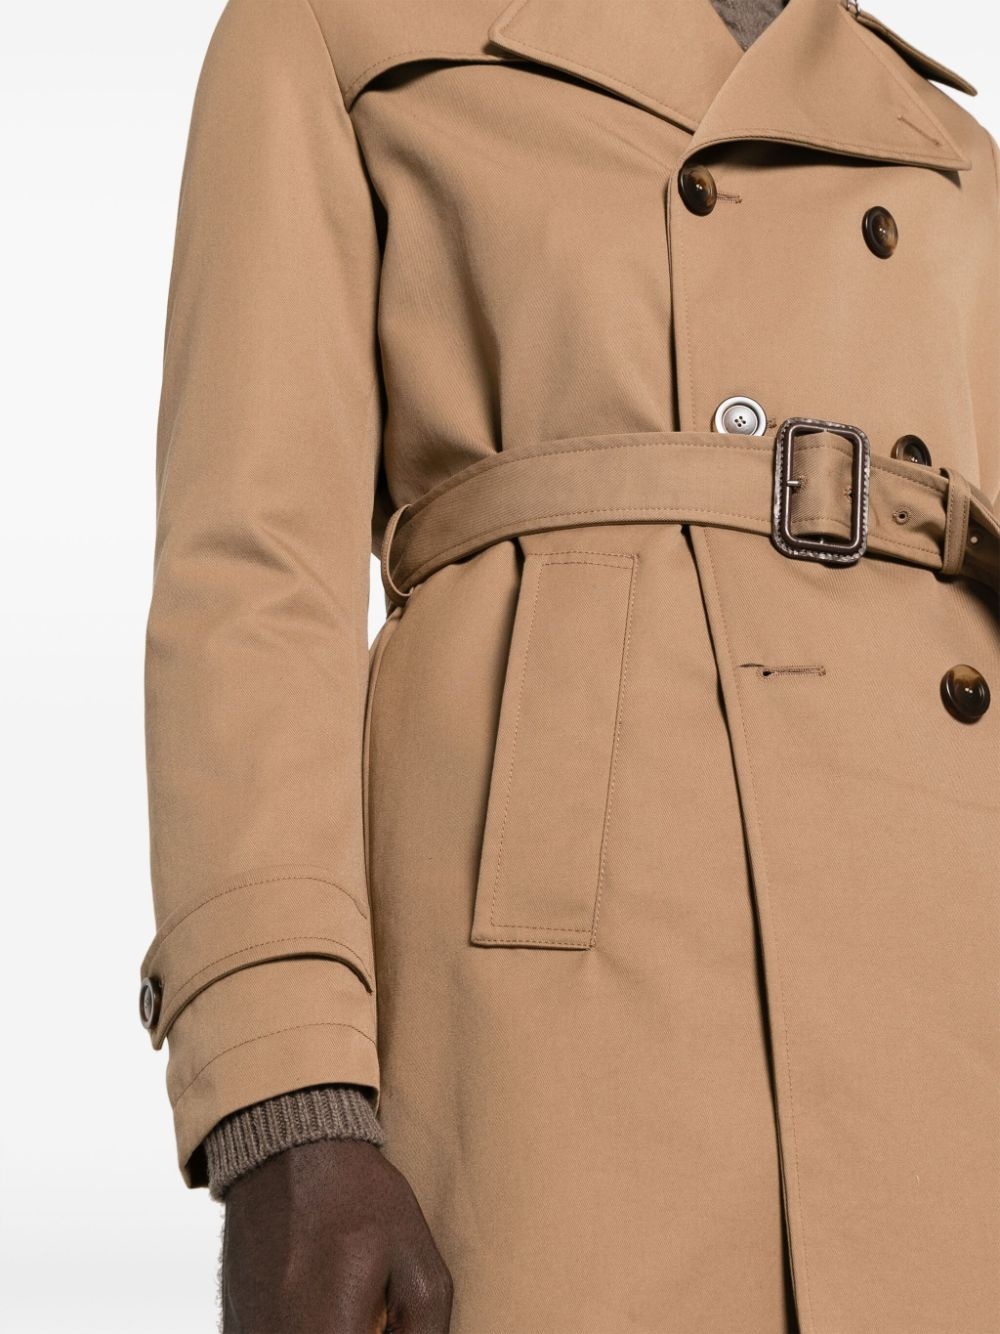 notched-lapels double-breasted trench coat - 5